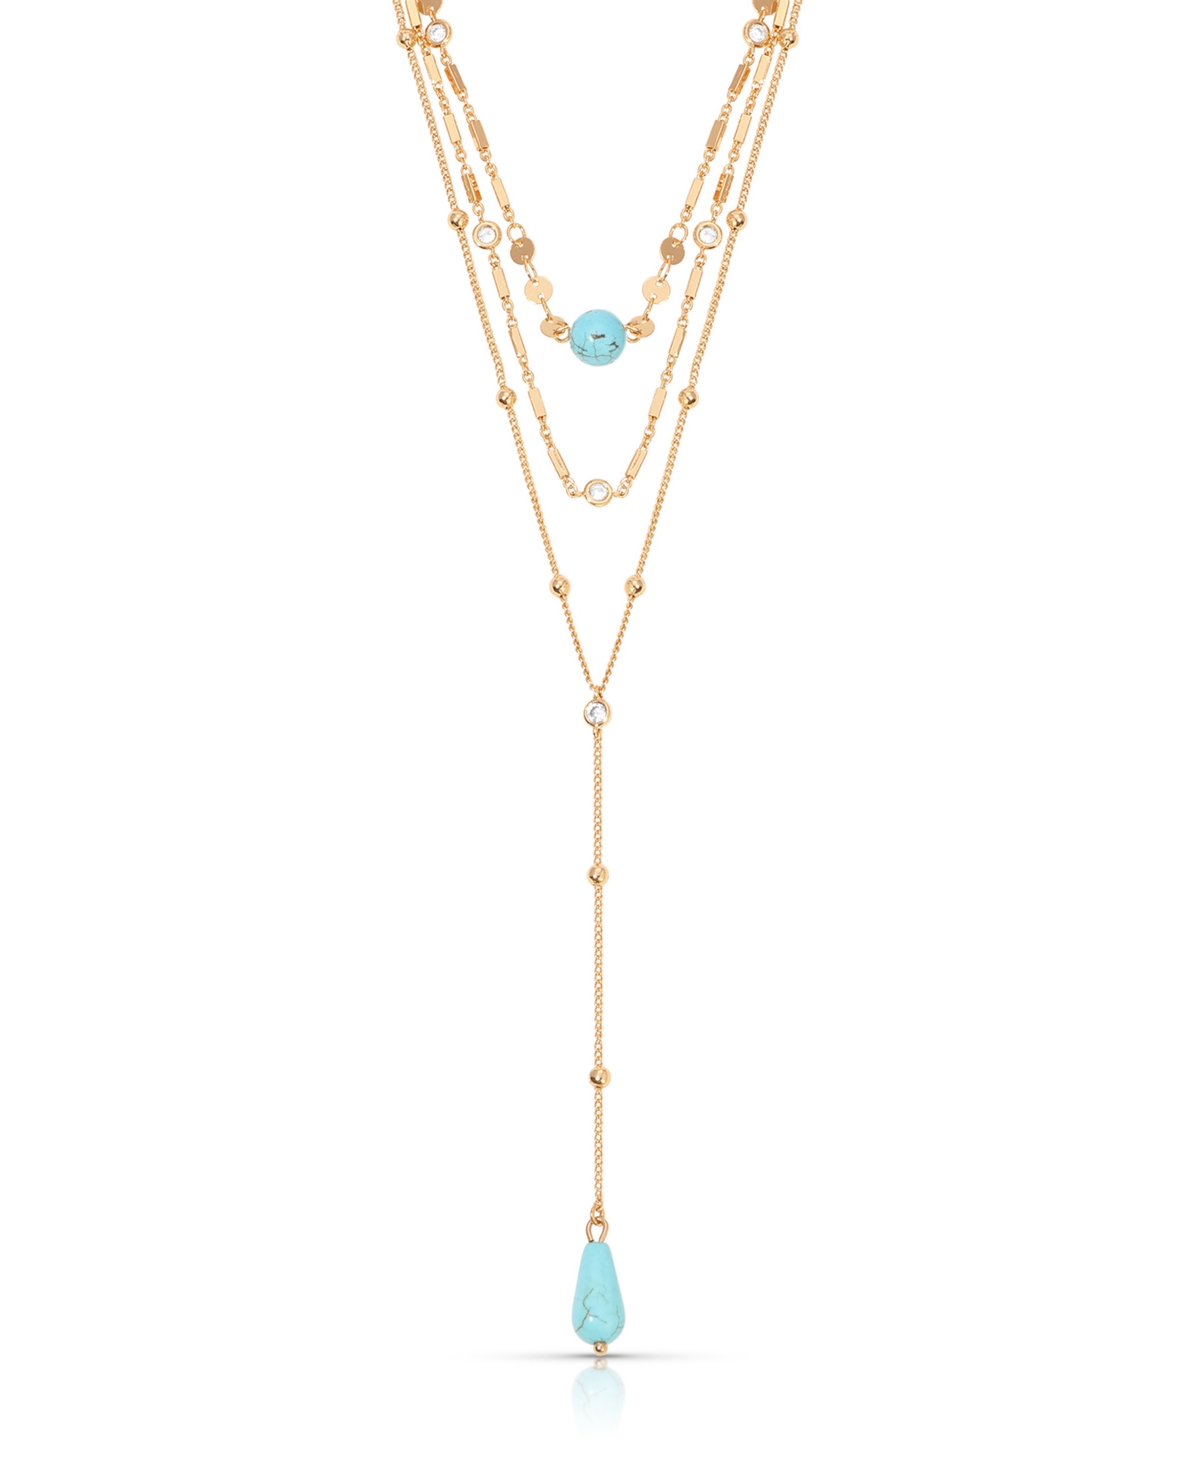 Turquoise 18k Gold Plated Multi-Chain Choker - Turquoise